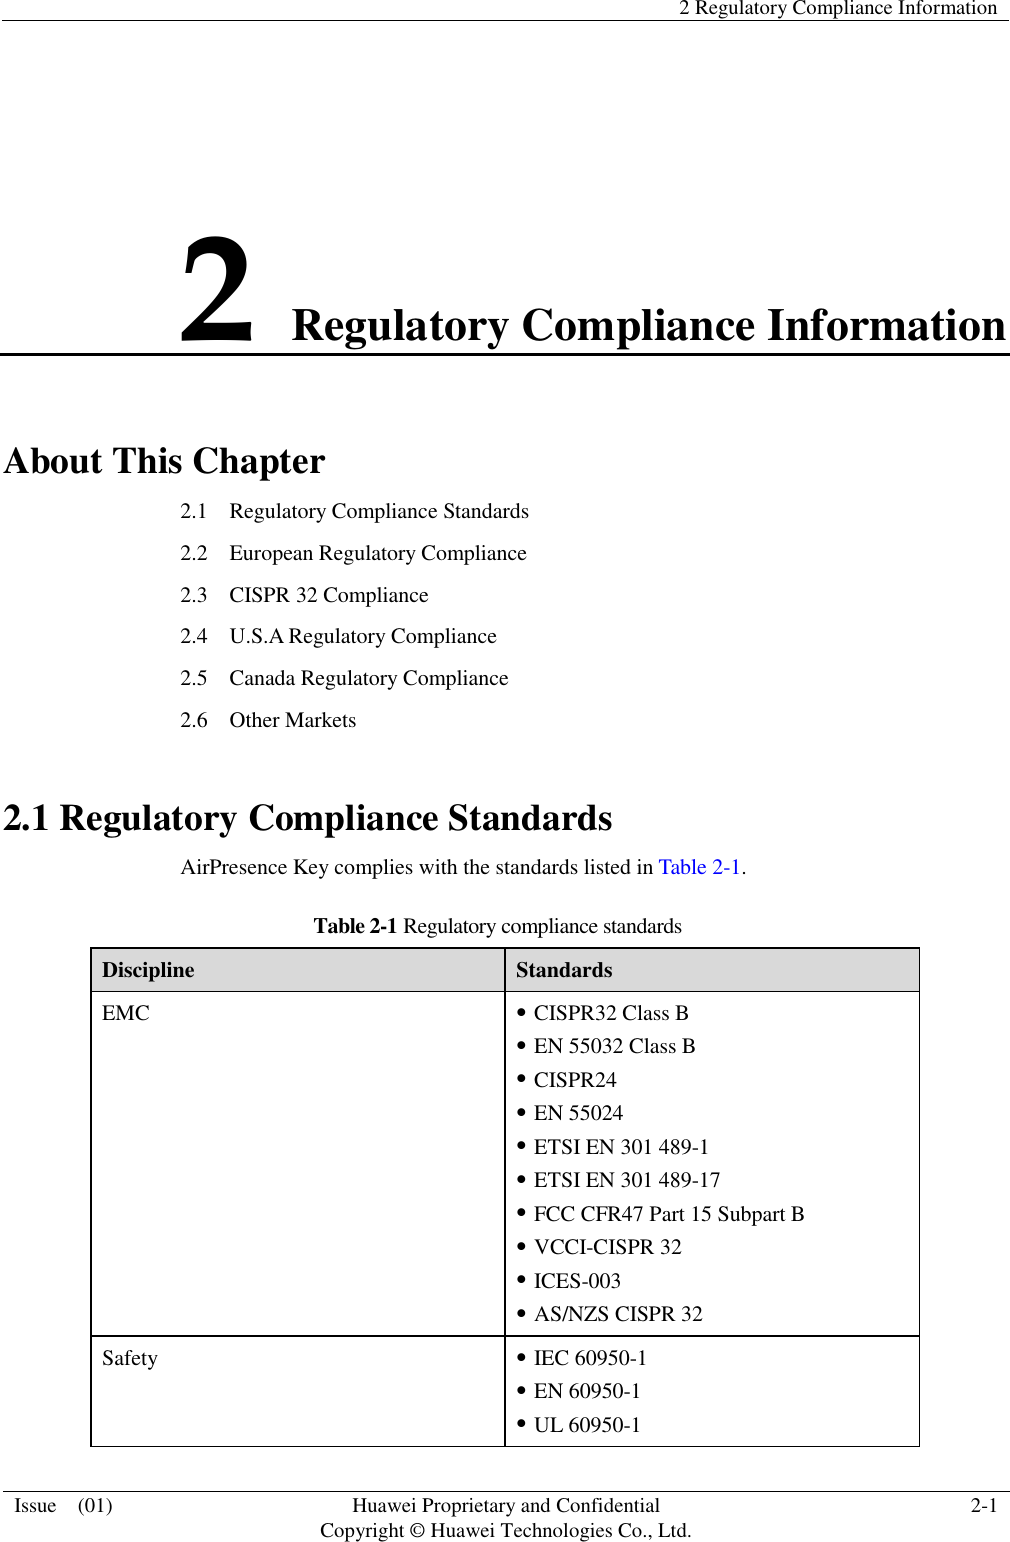   2 Regulatory Compliance Information  Issue    (01) Huawei Proprietary and Confidential                                     Copyright © Huawei Technologies Co., Ltd. 2-1  2 Regulatory Compliance Information About This Chapter 2.1    Regulatory Compliance Standards 2.2    European Regulatory Compliance 2.3  CISPR 32 Compliance 2.4  U.S.A Regulatory Compliance 2.5  Canada Regulatory Compliance 2.6  Other Markets 2.1 Regulatory Compliance Standards AirPresence Key complies with the standards listed in Table 2-1. Table 2-1 Regulatory compliance standards Discipline Standards EMC  CISPR32 Class B  EN 55032 Class B  CISPR24  EN 55024  ETSI EN 301 489-1  ETSI EN 301 489-17  FCC CFR47 Part 15 Subpart B  VCCI-CISPR 32  ICES-003  AS/NZS CISPR 32 Safety  IEC 60950-1  EN 60950-1  UL 60950-1 